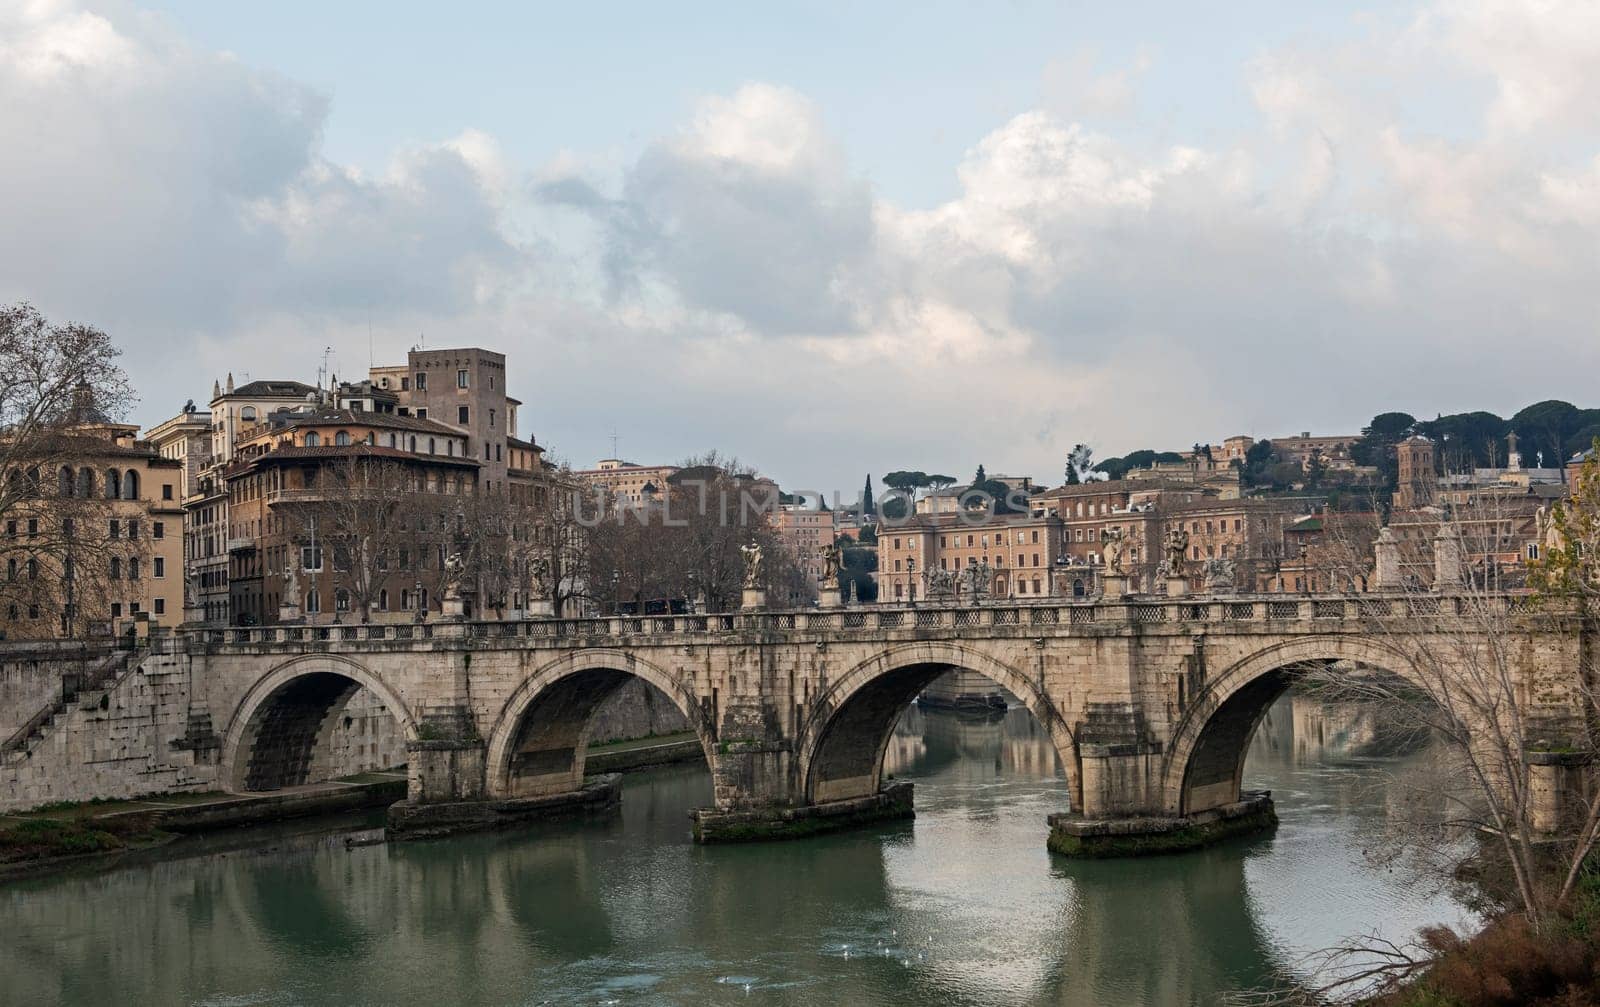 Old stone arched road bridge over large river Tiber in Rome Europen city centre with overcast cloudy sky